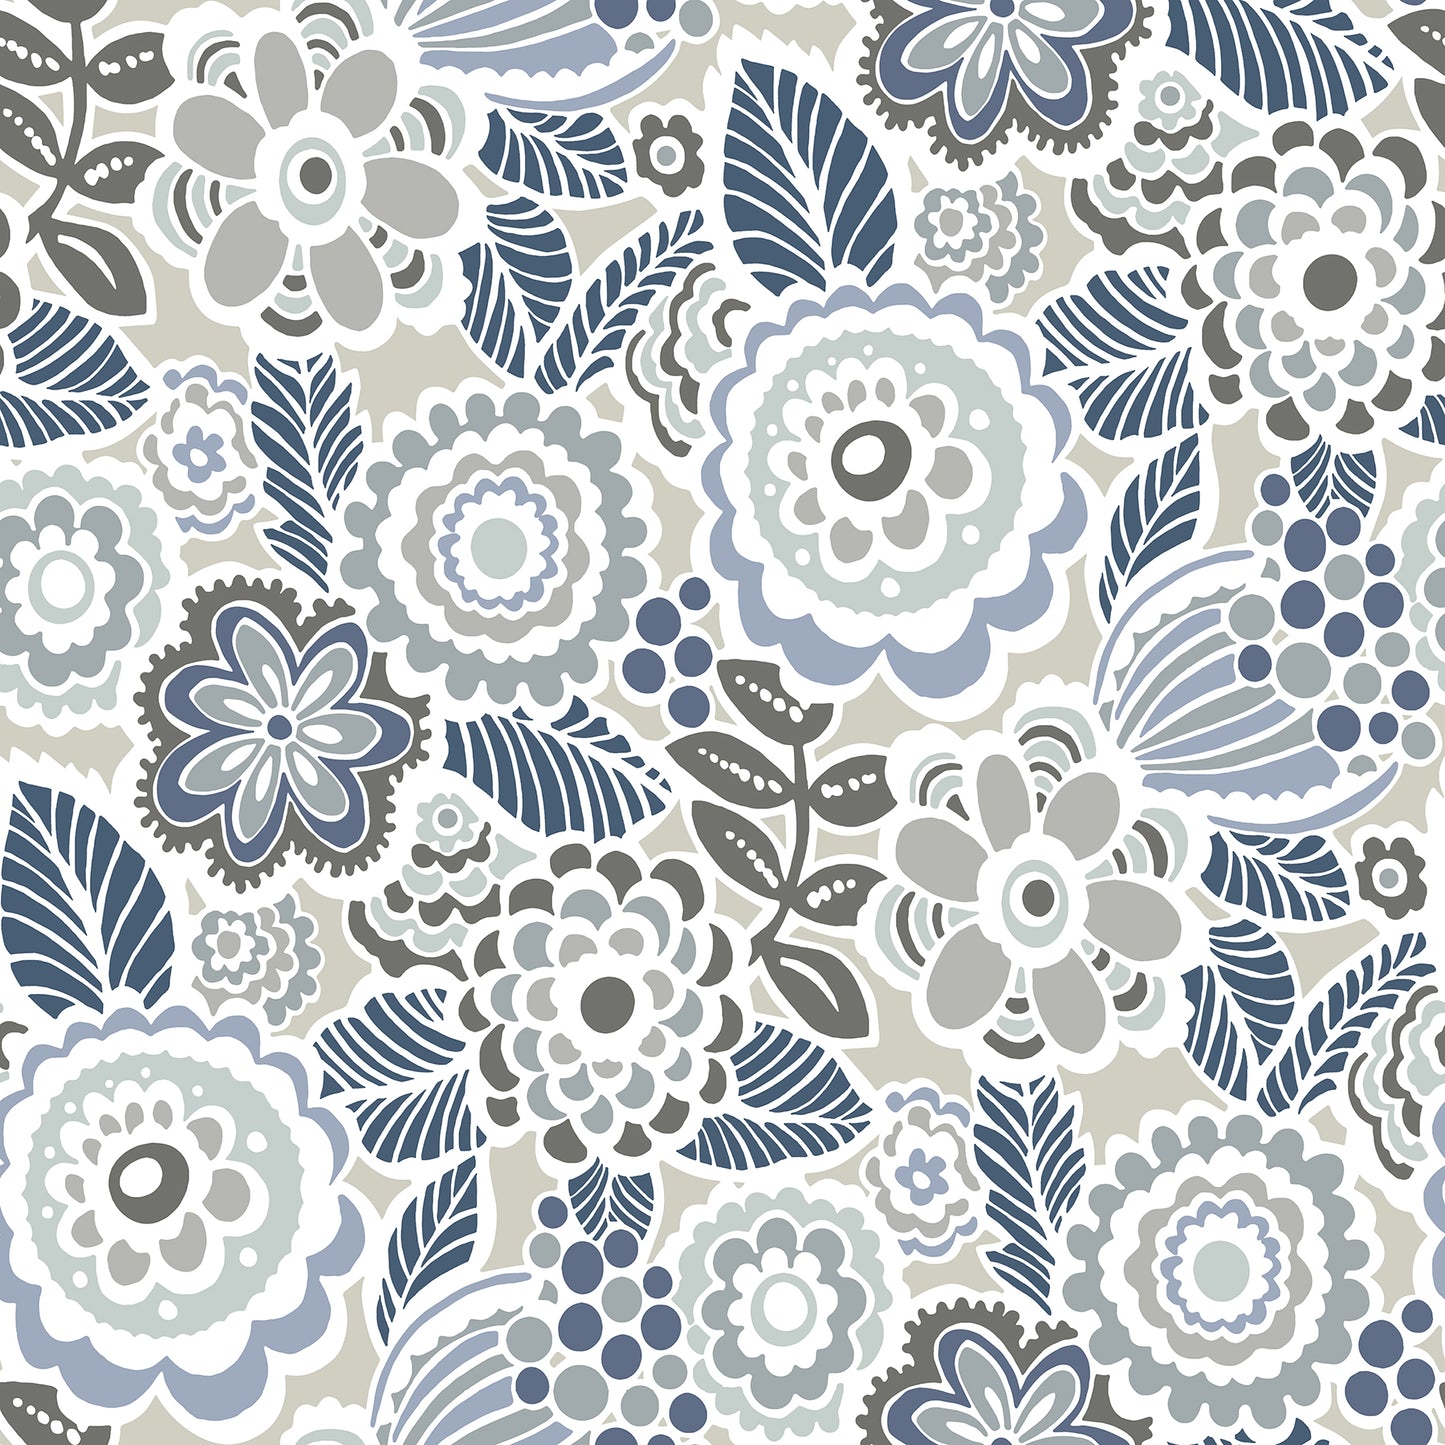 Looking for 2903-25864 Blue Bell Lucy Grey Floral A Street Prints Wallpaper